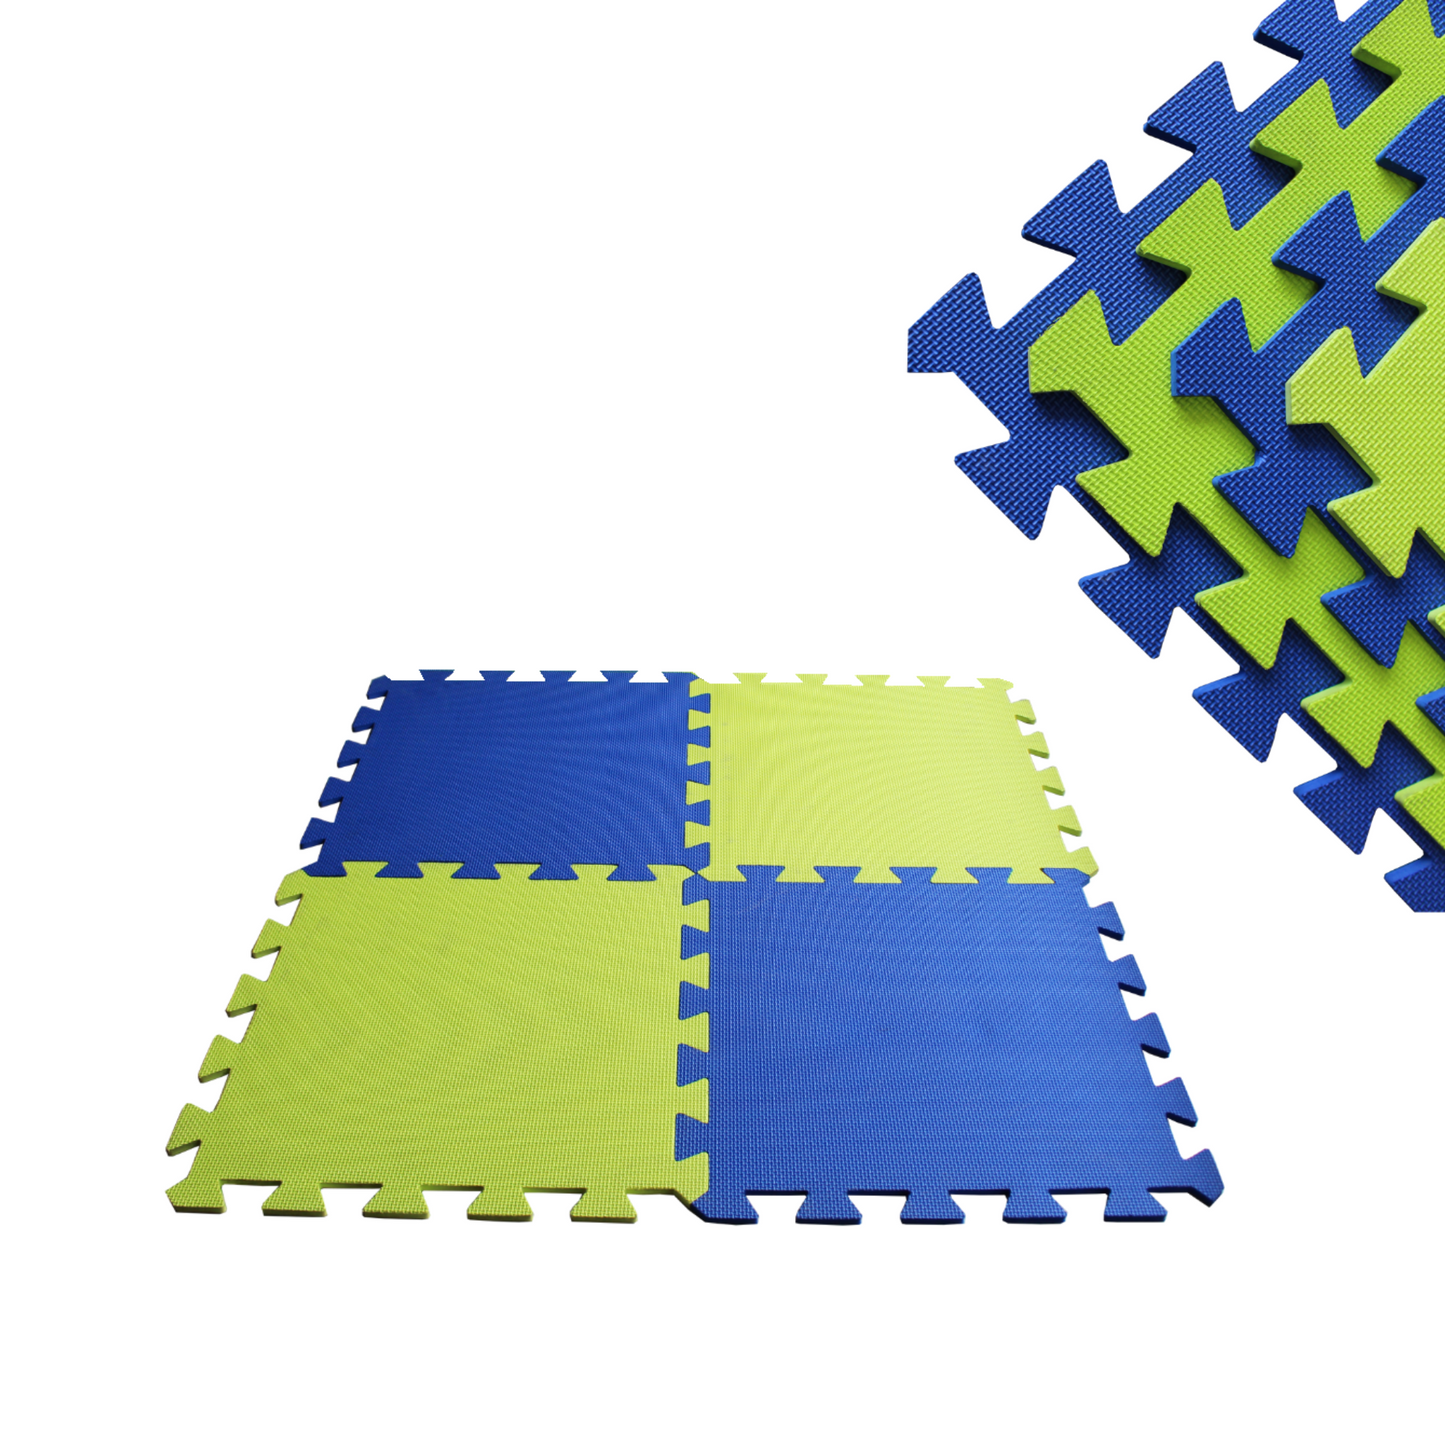 20mm Thick Multi-Coloured Mats | Pack of 4 | Wide Range of Colour Combinations